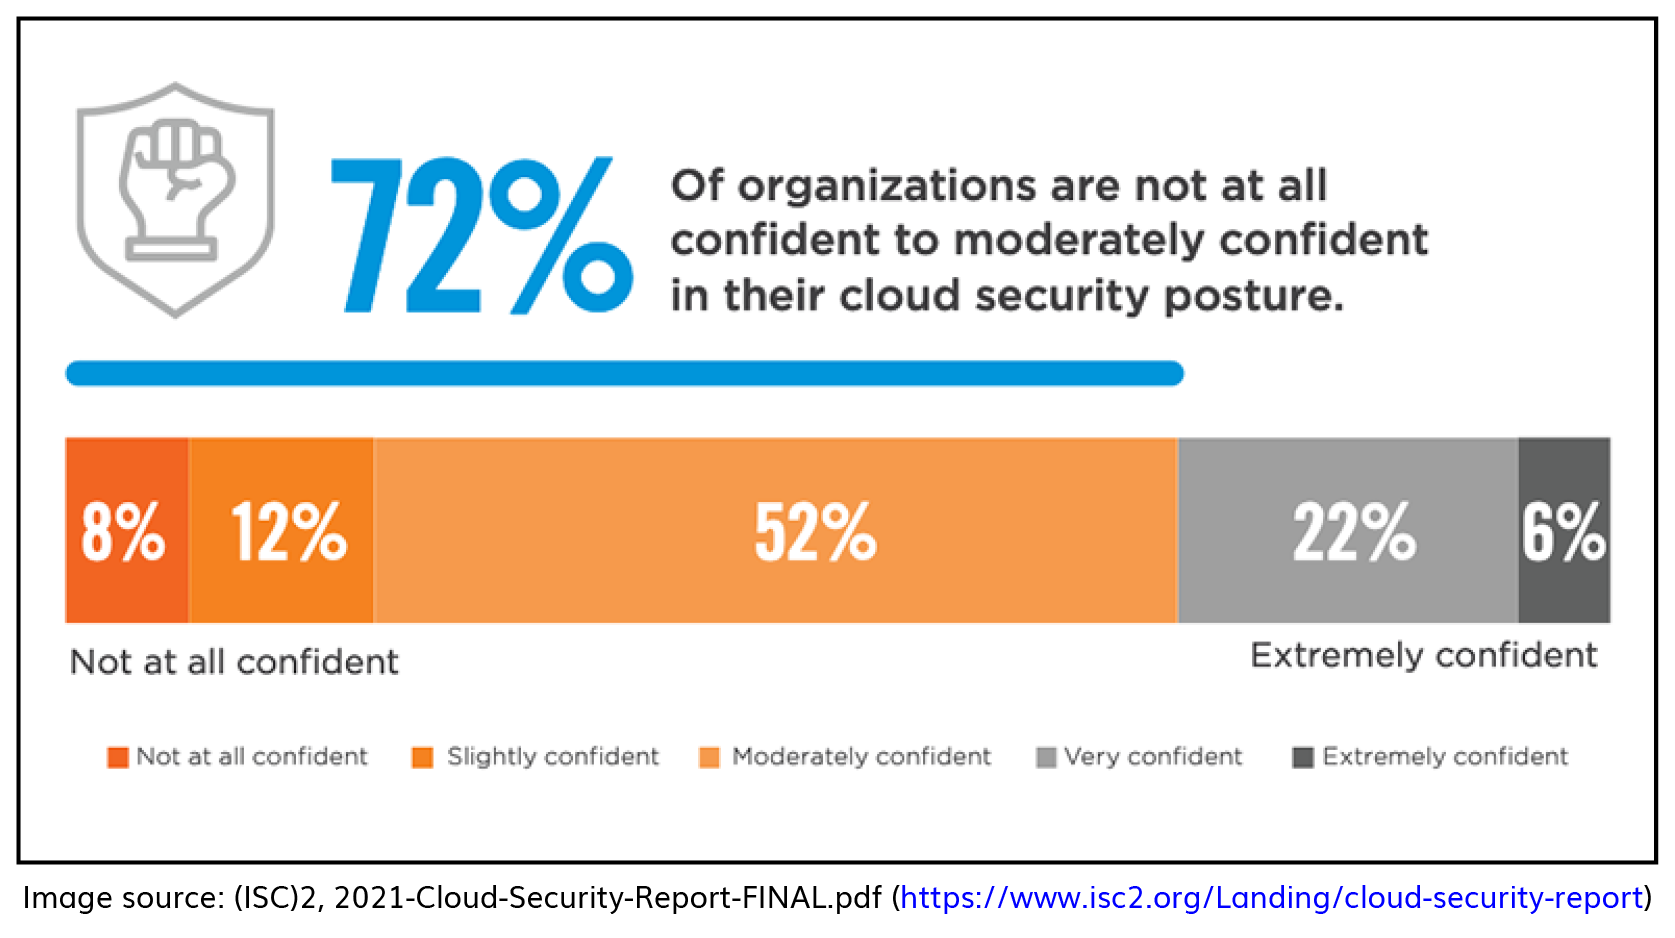 Preparation and strategy for cloud security